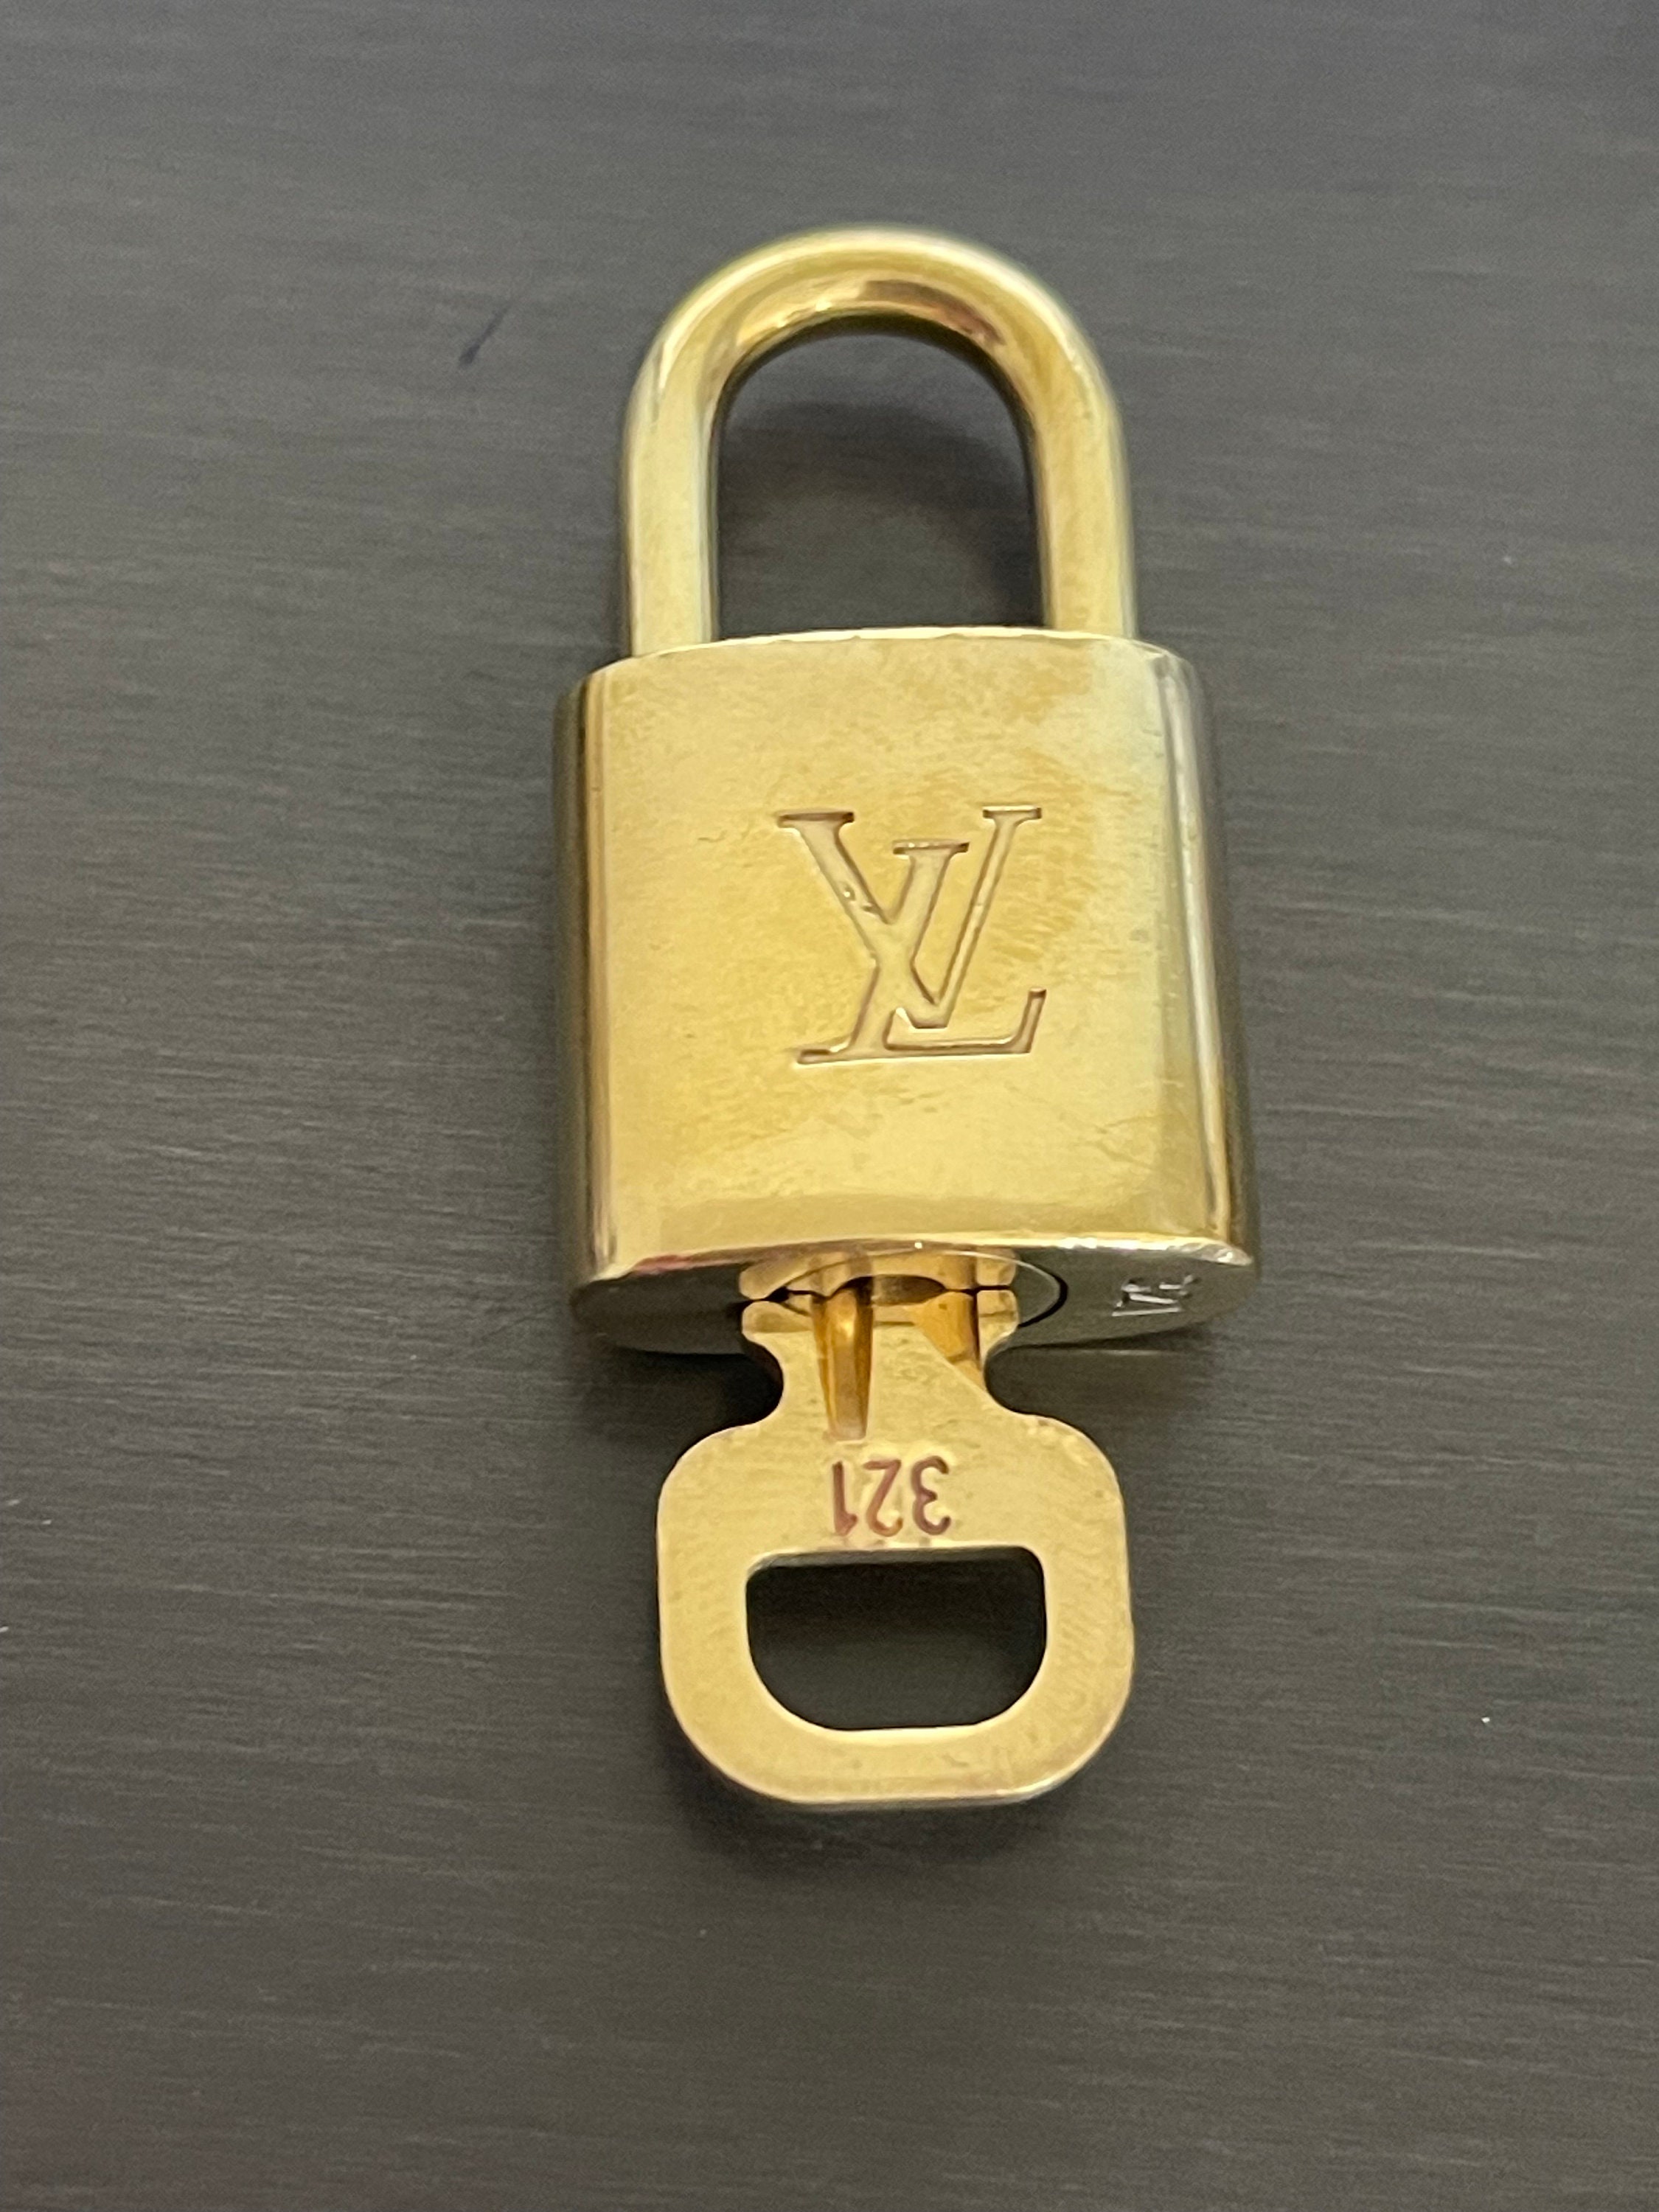 Pinkerly Special Louis Vuitton Padlock and One Key 321 Lock 